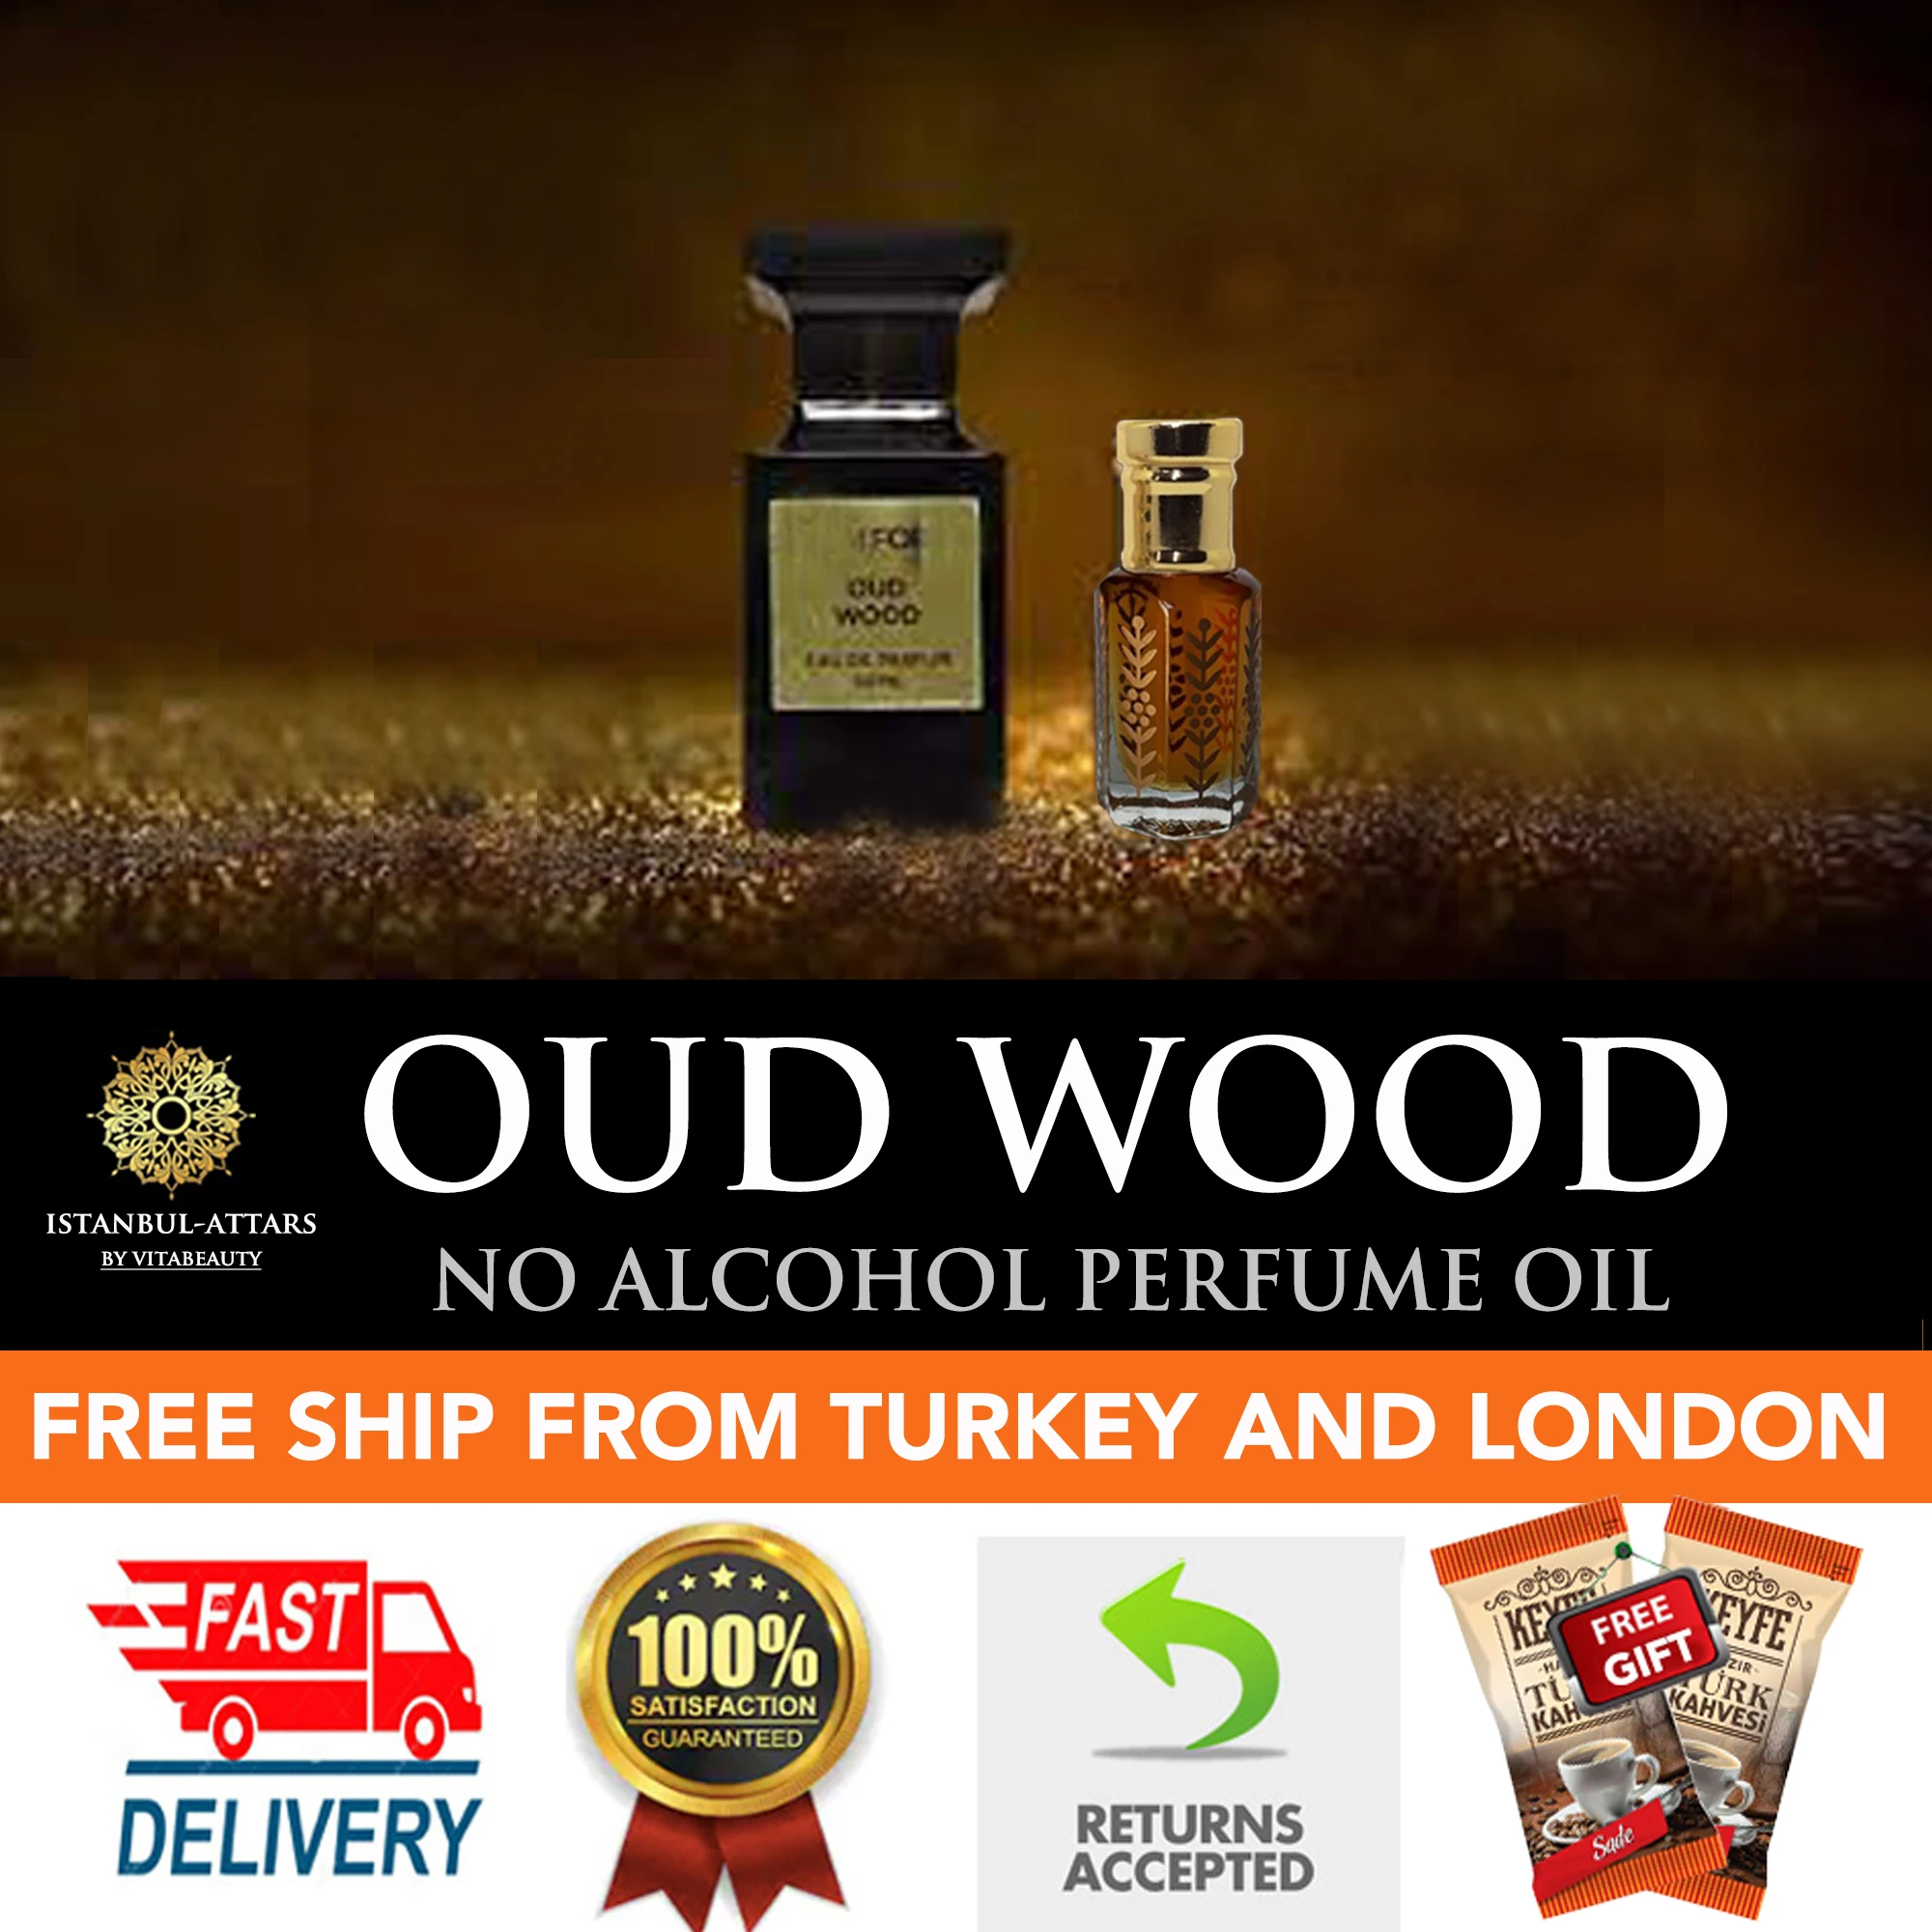 

OUD WOOD - BLACK ORCHID - TOBACCO VANILLE TOM FORD inspired CONCENTRATED ALCOHOL FREE Perfume Oil Attar FREE FAST SHIPPING